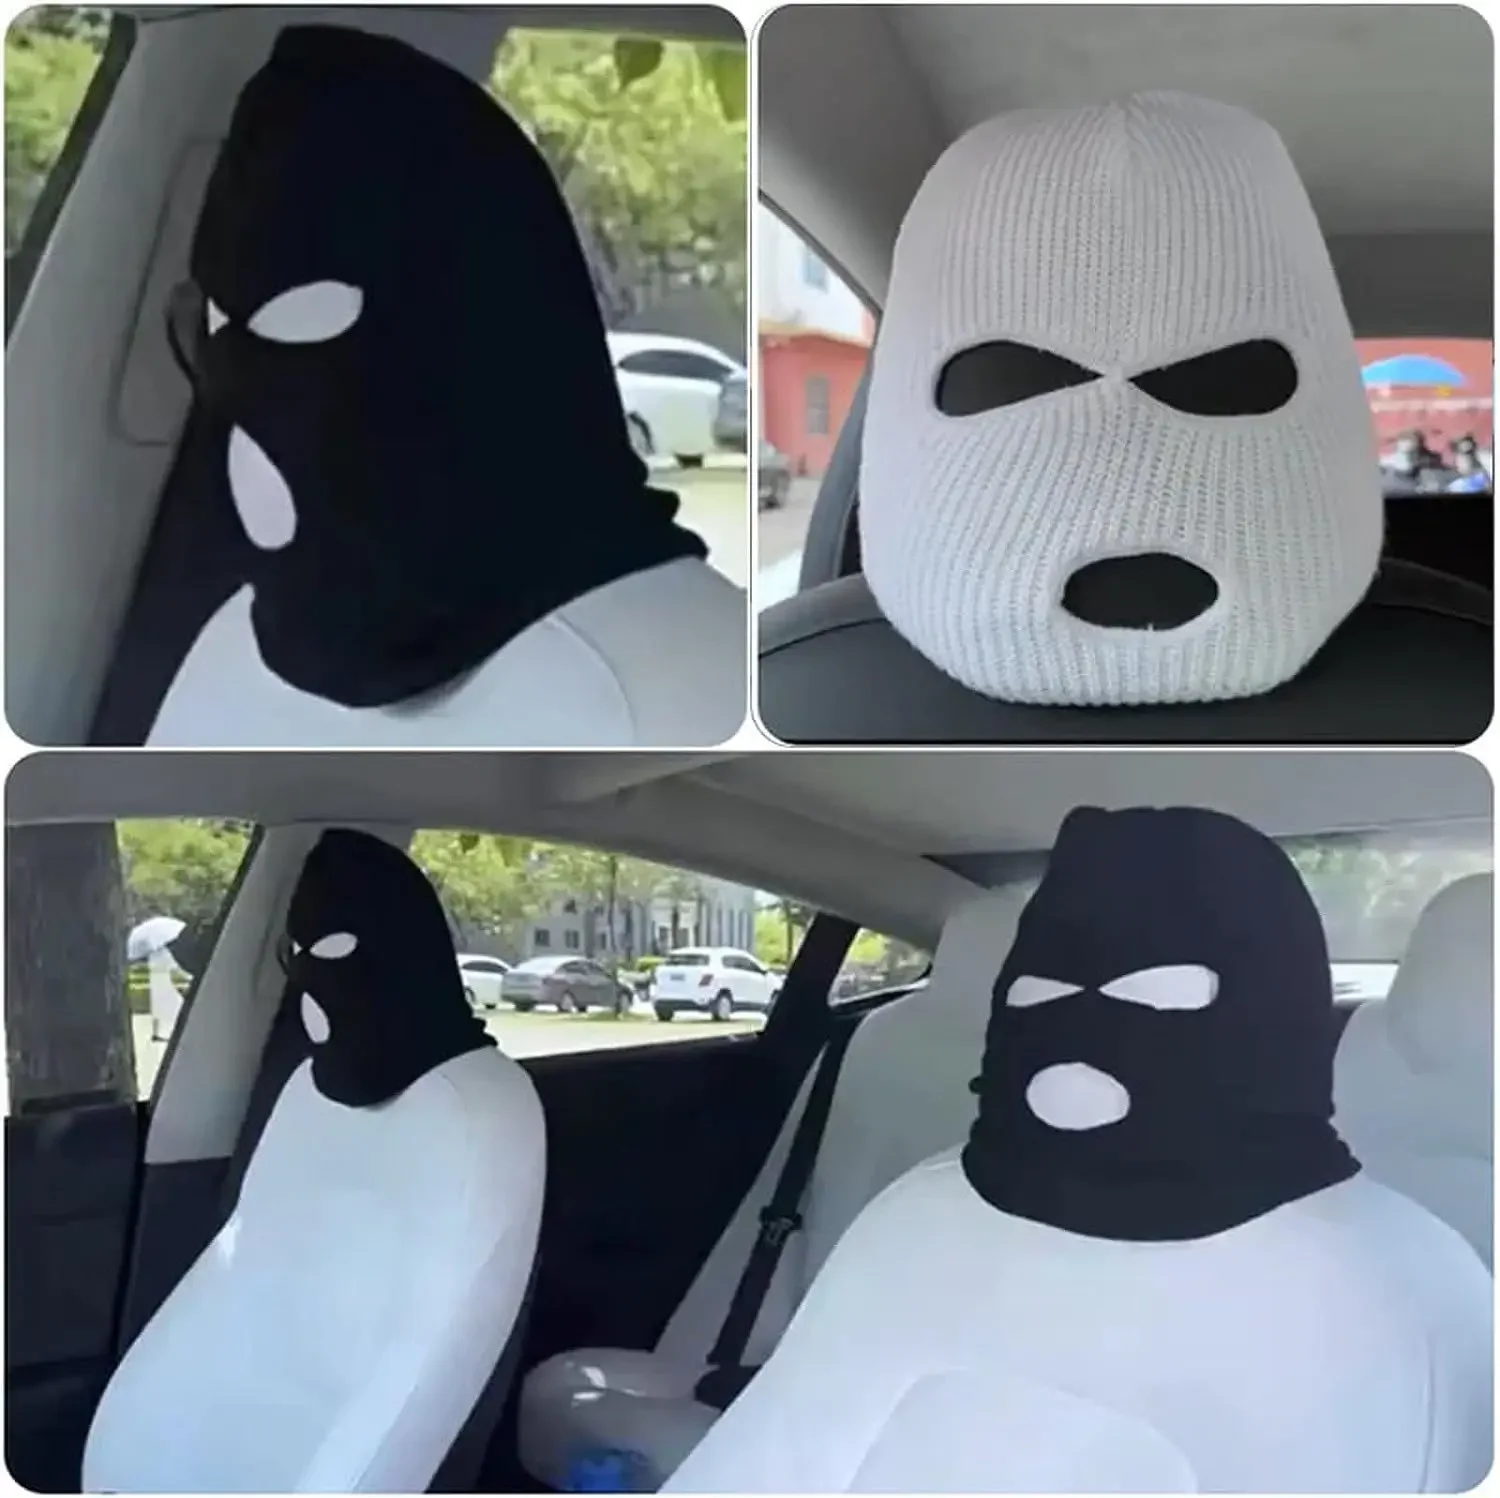 Halloween Car Seat Cover Decoration, Masked Person Knitted Headgear, Anti-theft Warning Accessories